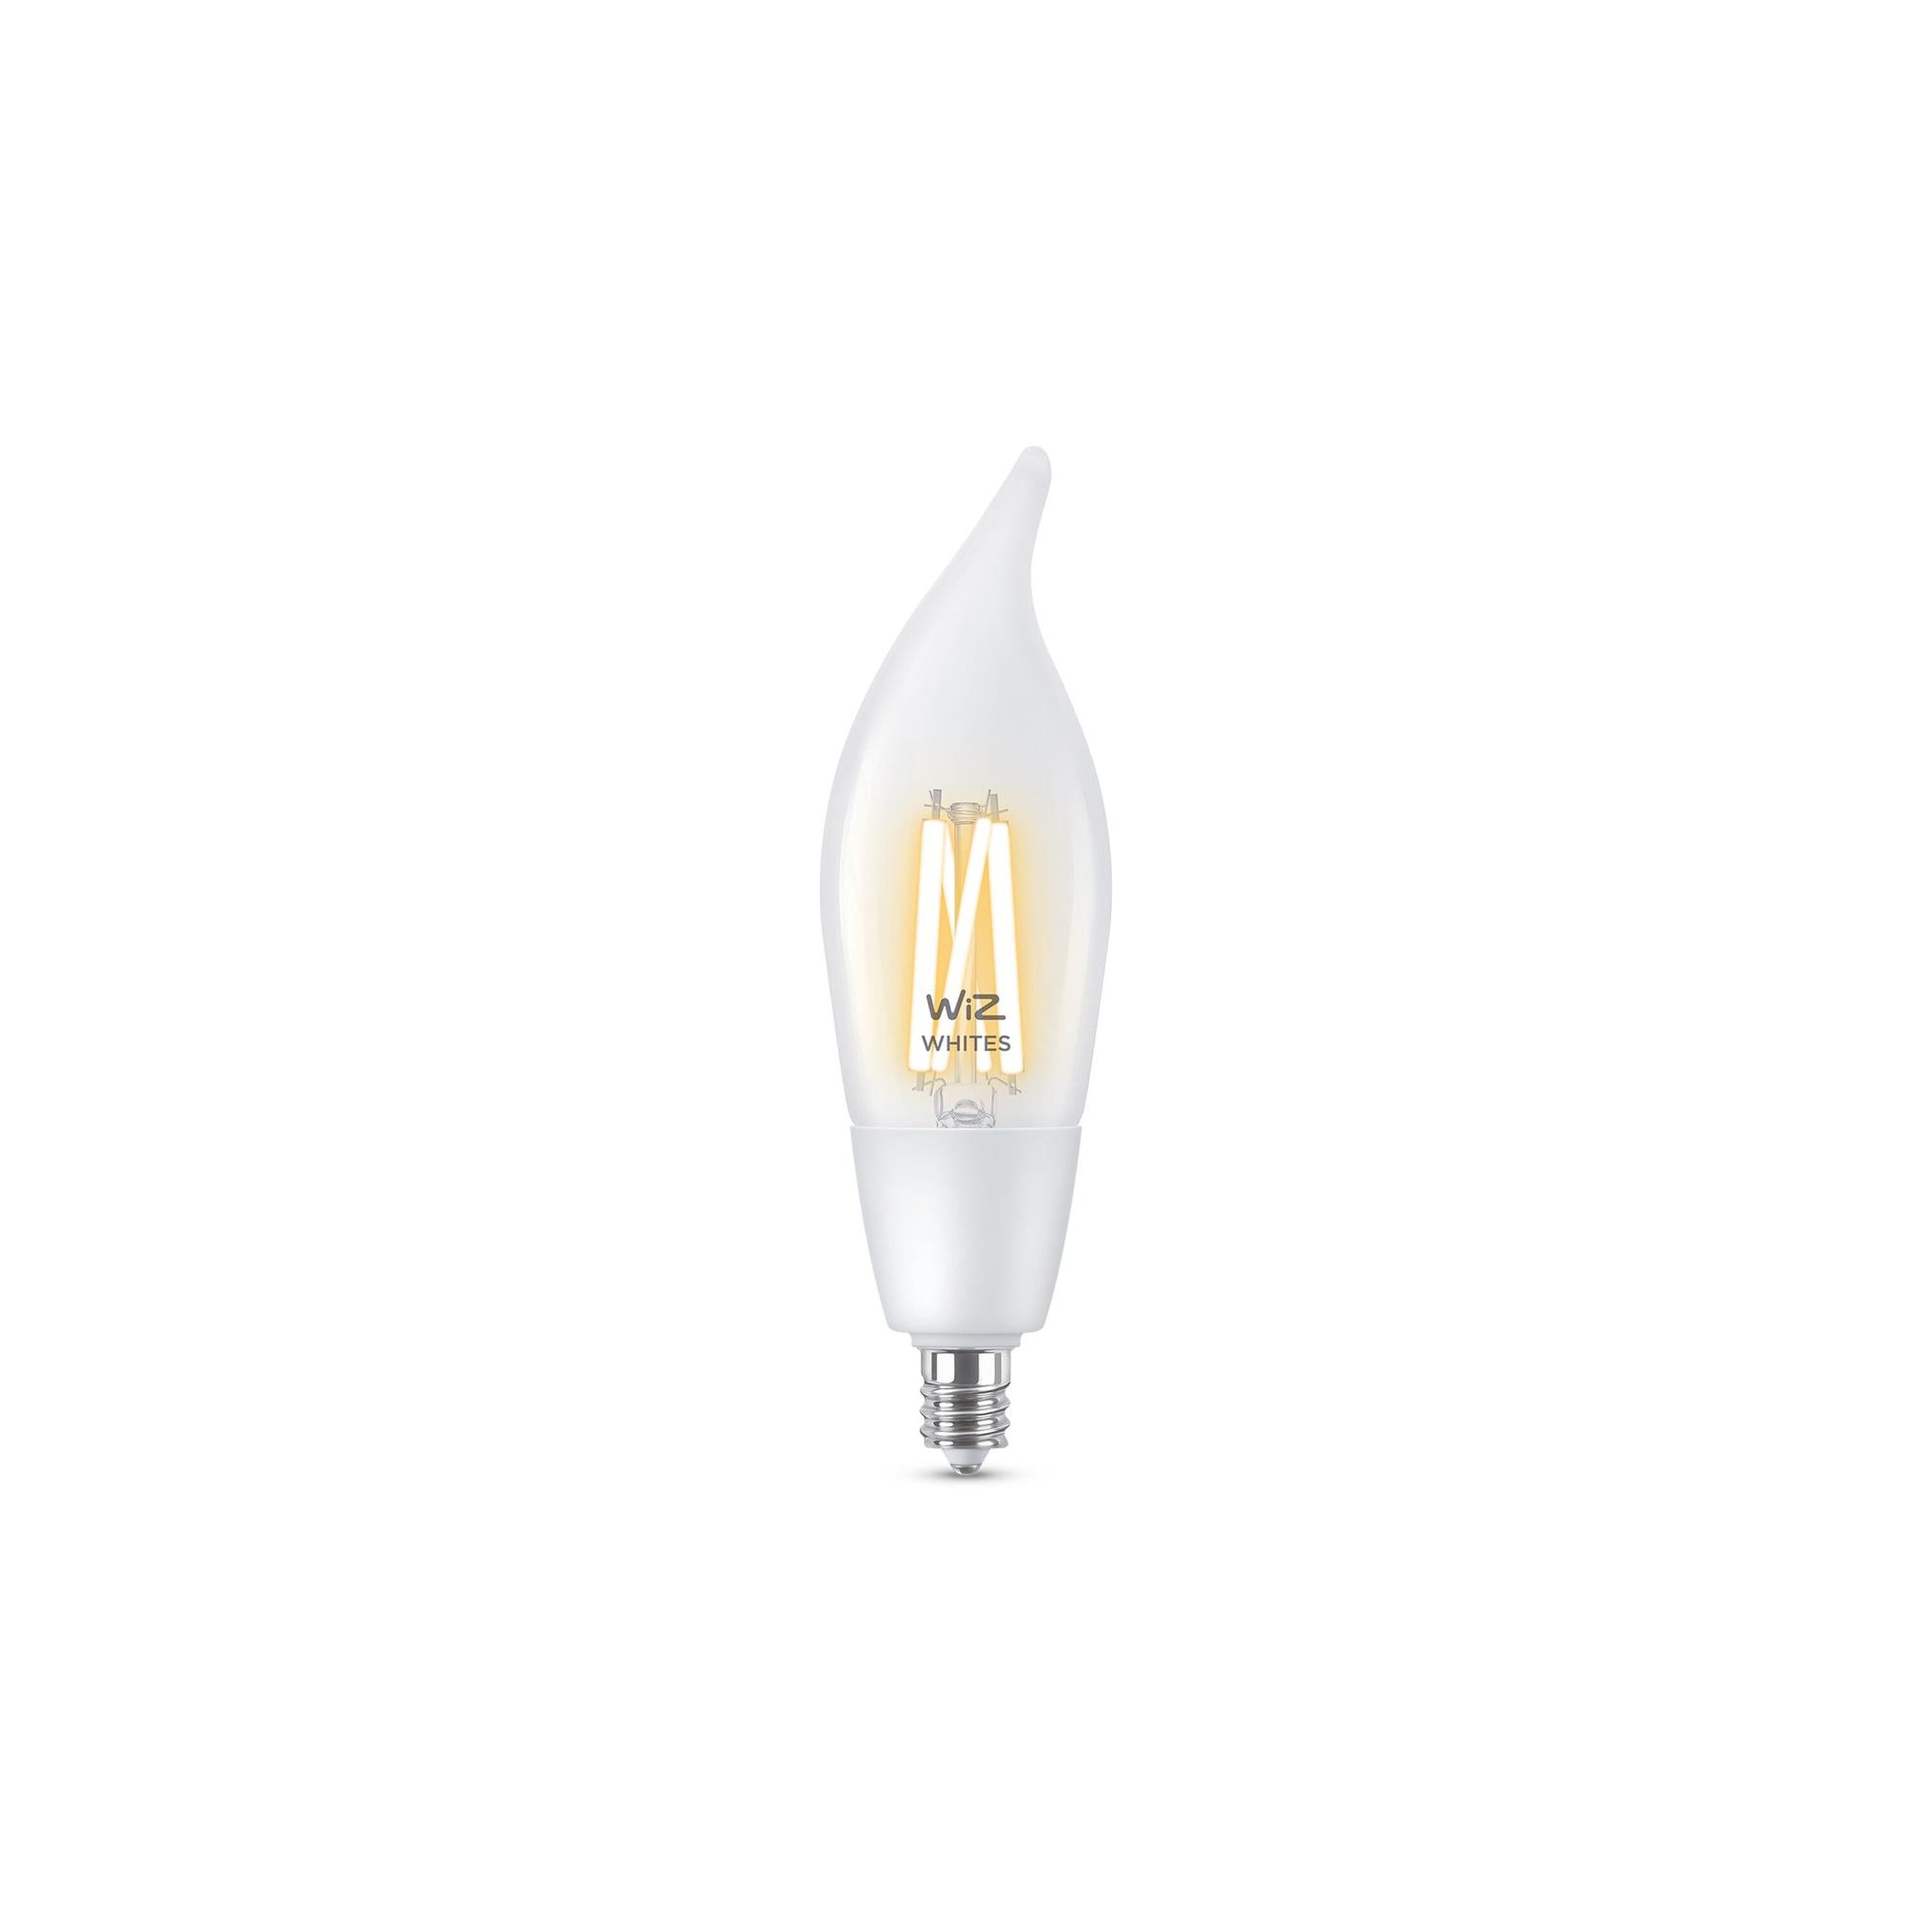 Philips Smart LED 8W E27 Dimmable Warm-to-Cool Classic Bulbs with WiZ  Connected and Bluetooth